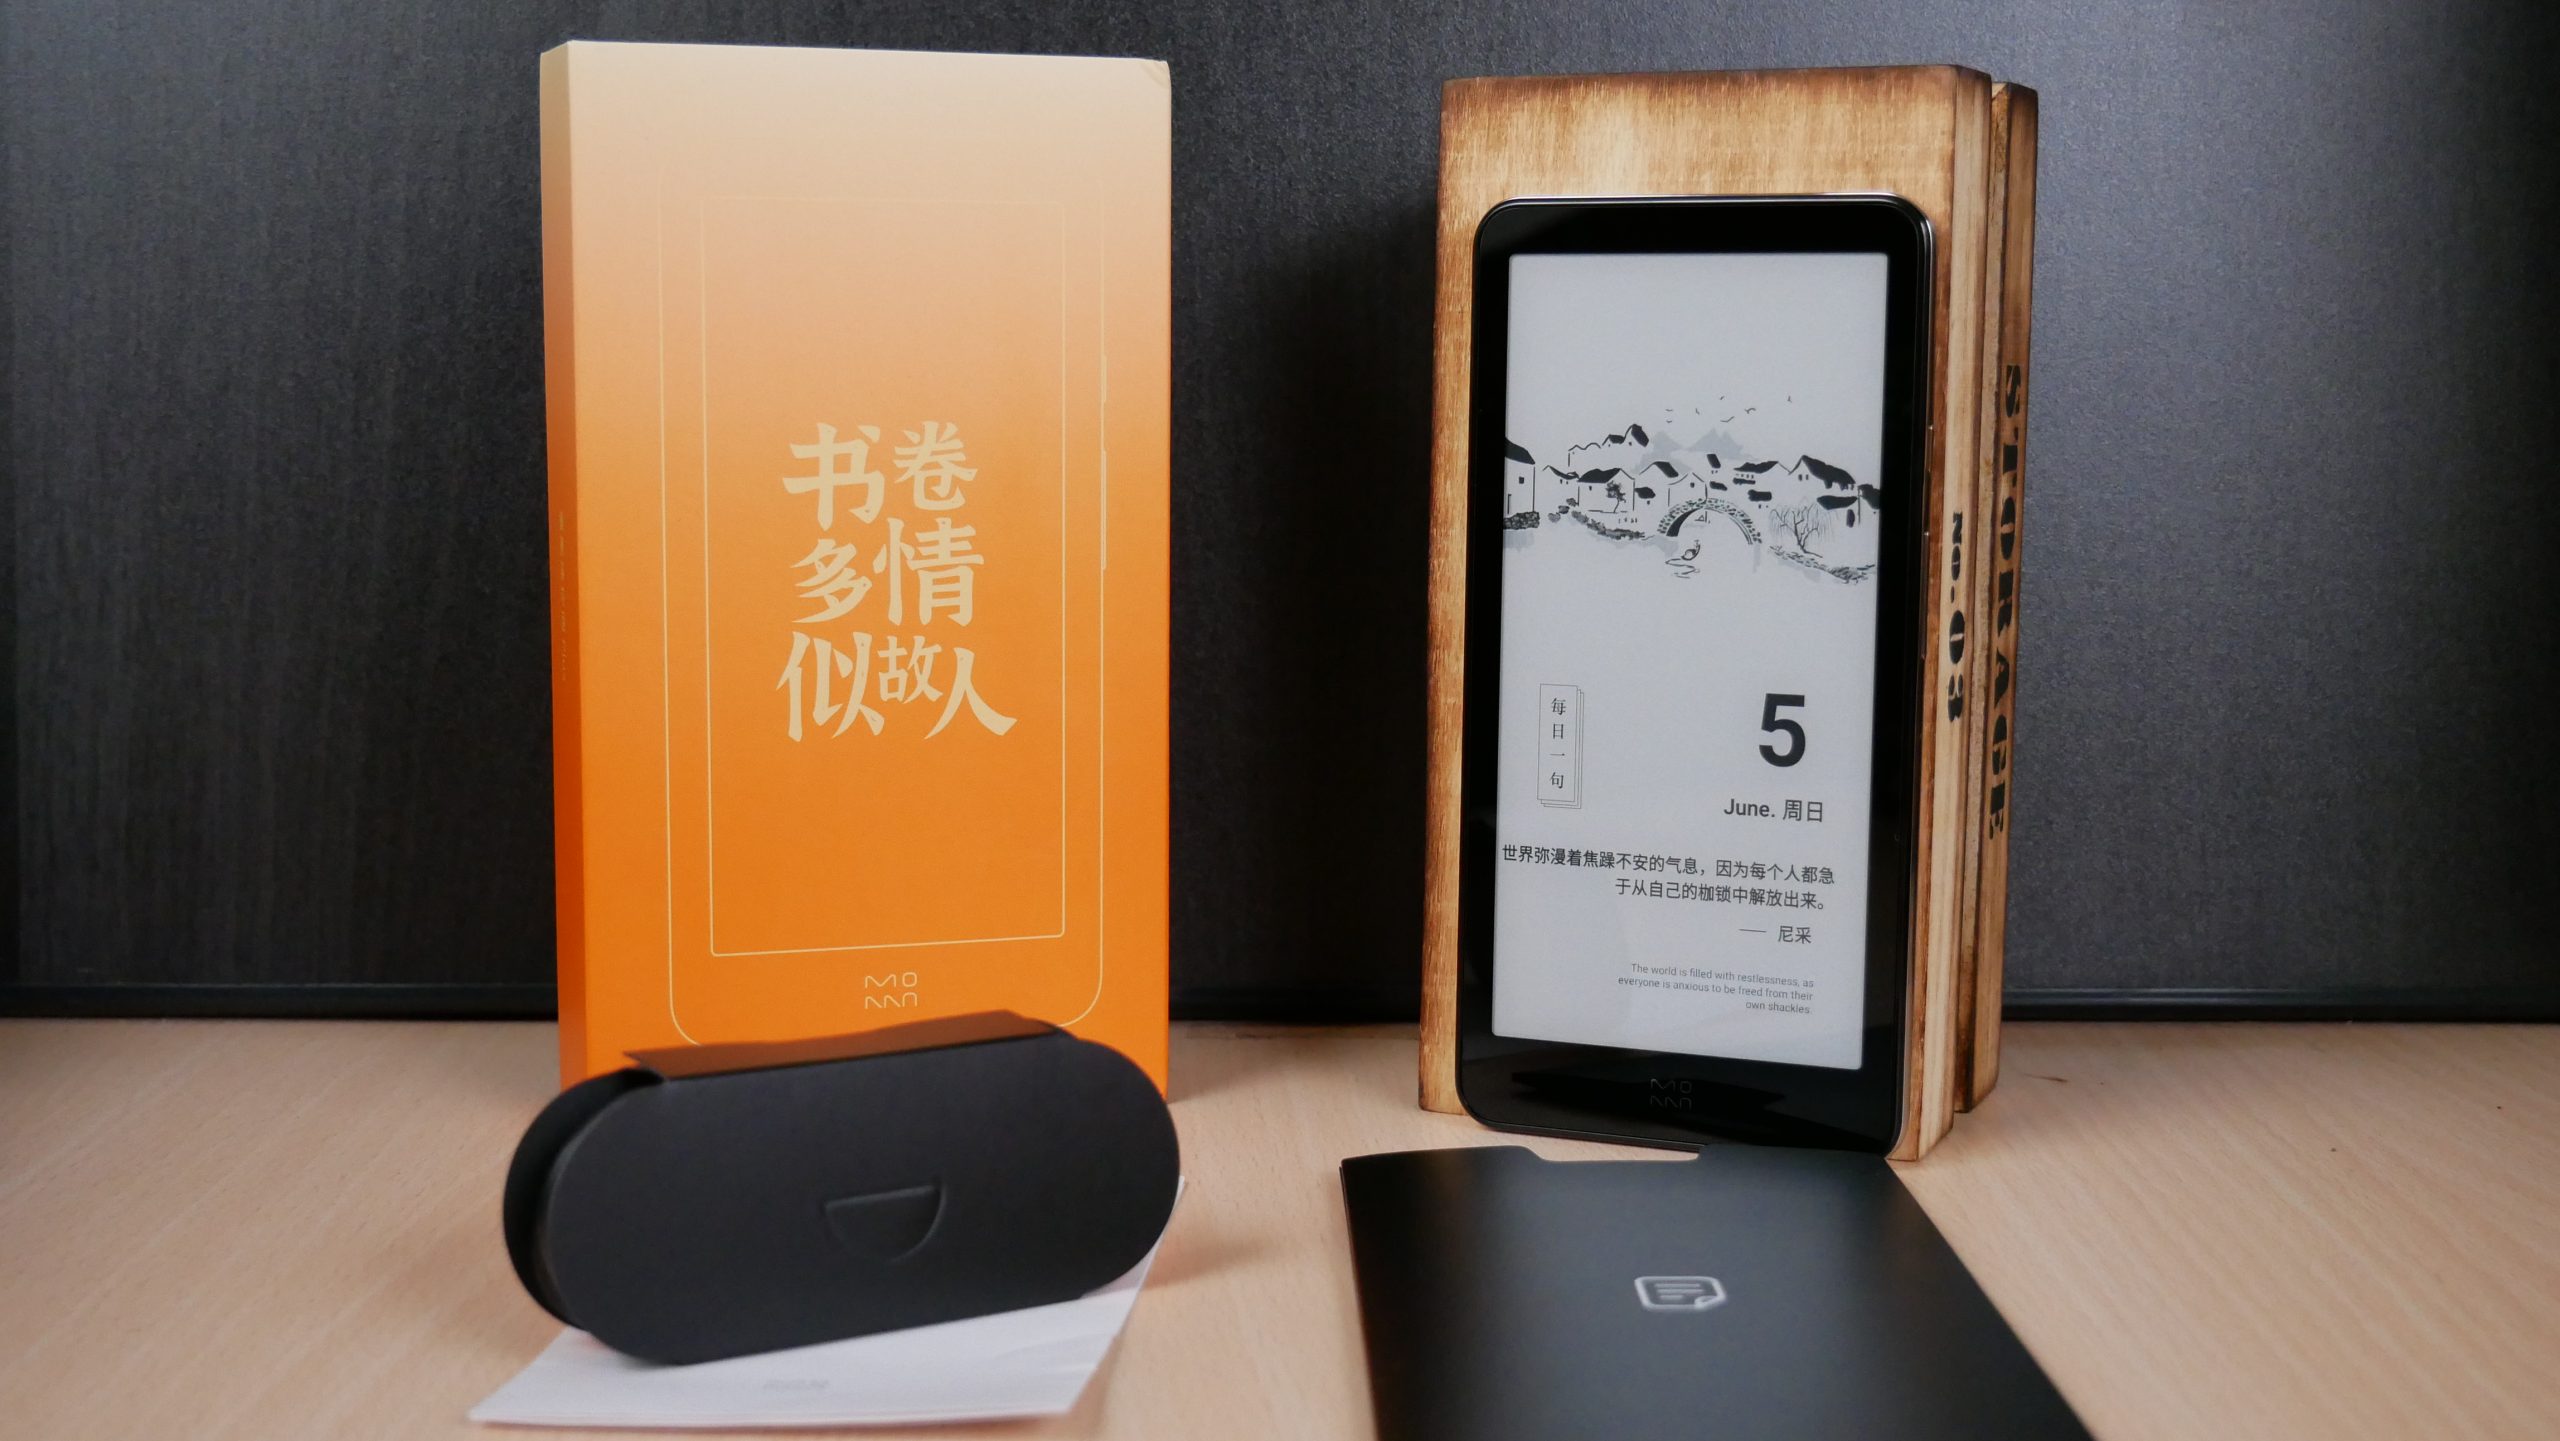 First, check out the Xiaomi InkPalm Plus e-reader